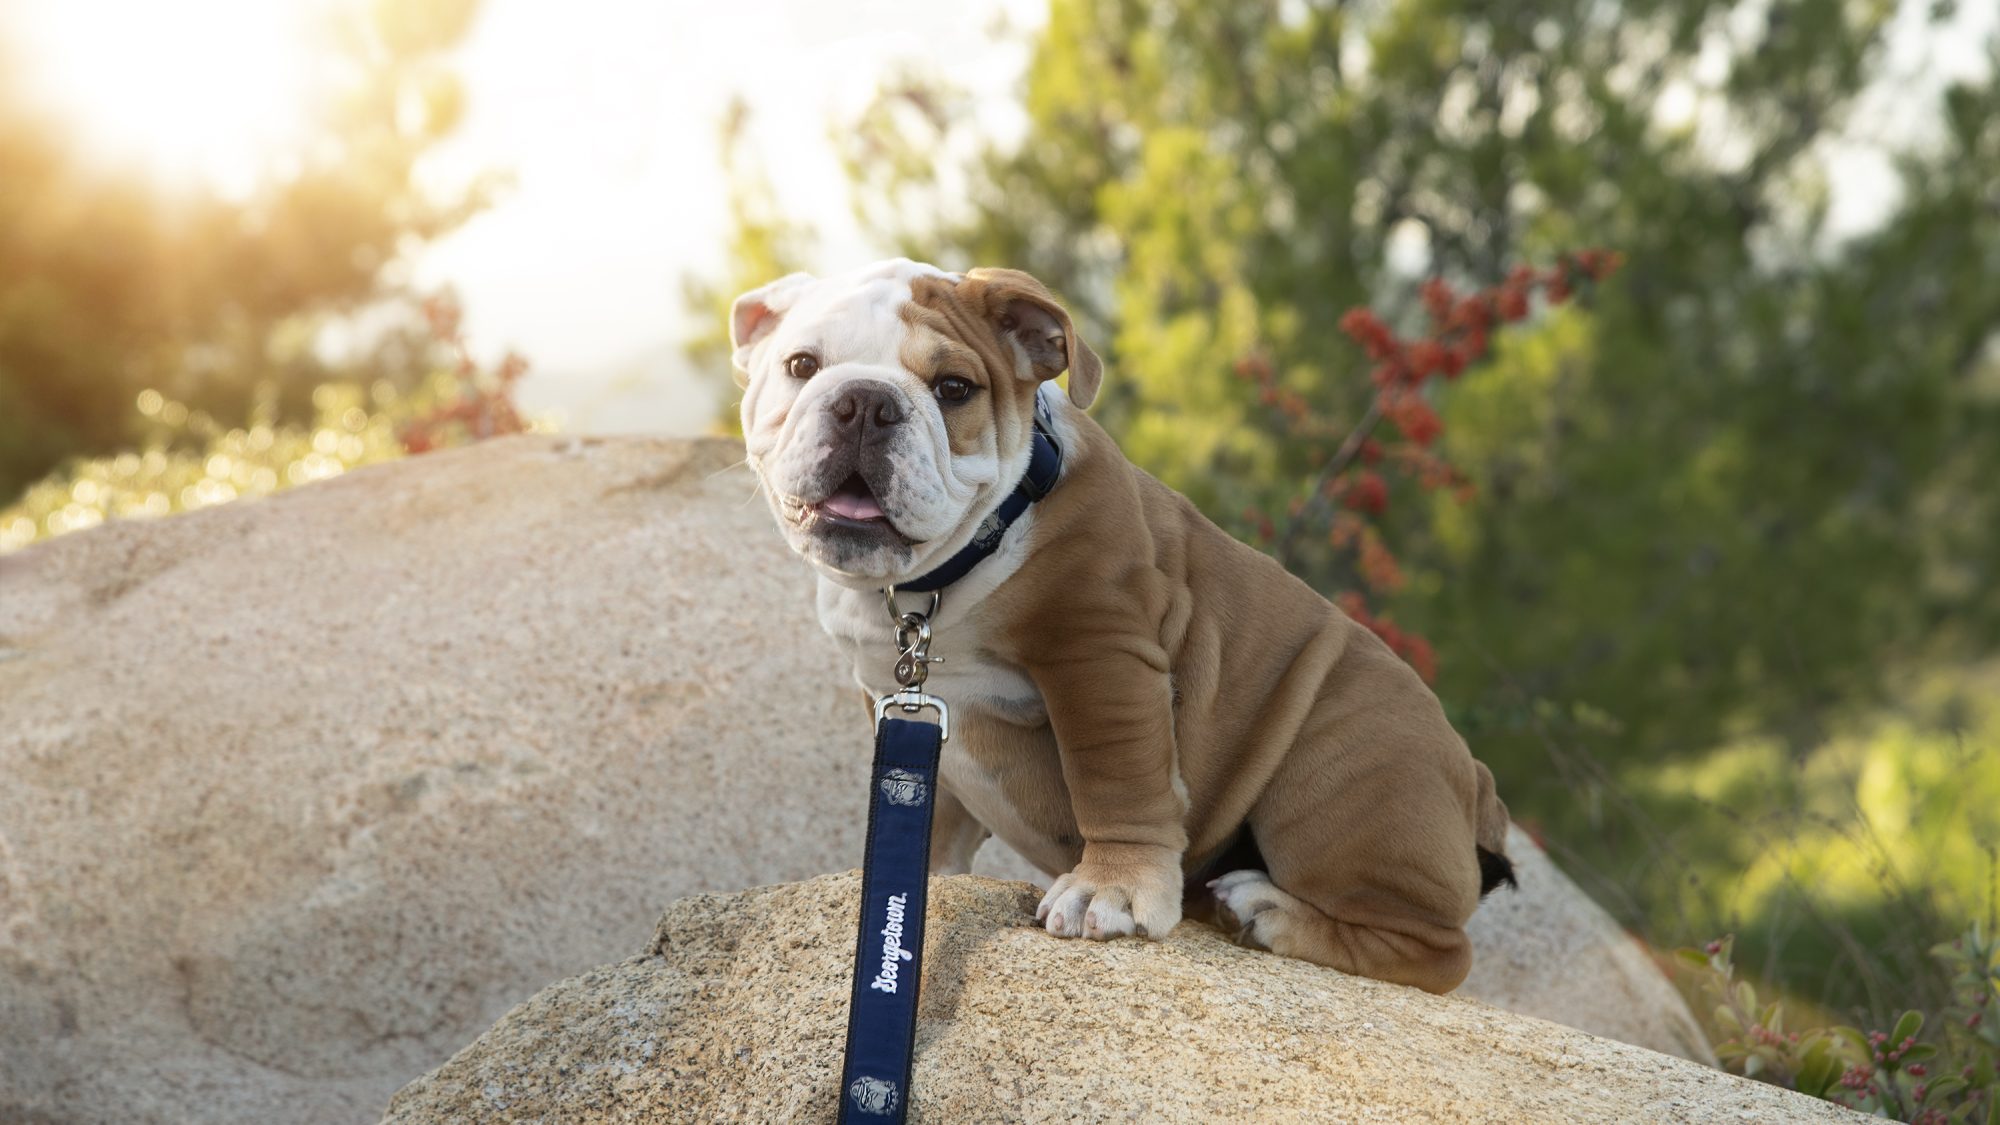 Jack the Bulldog is perched on a rock looking at the camera.